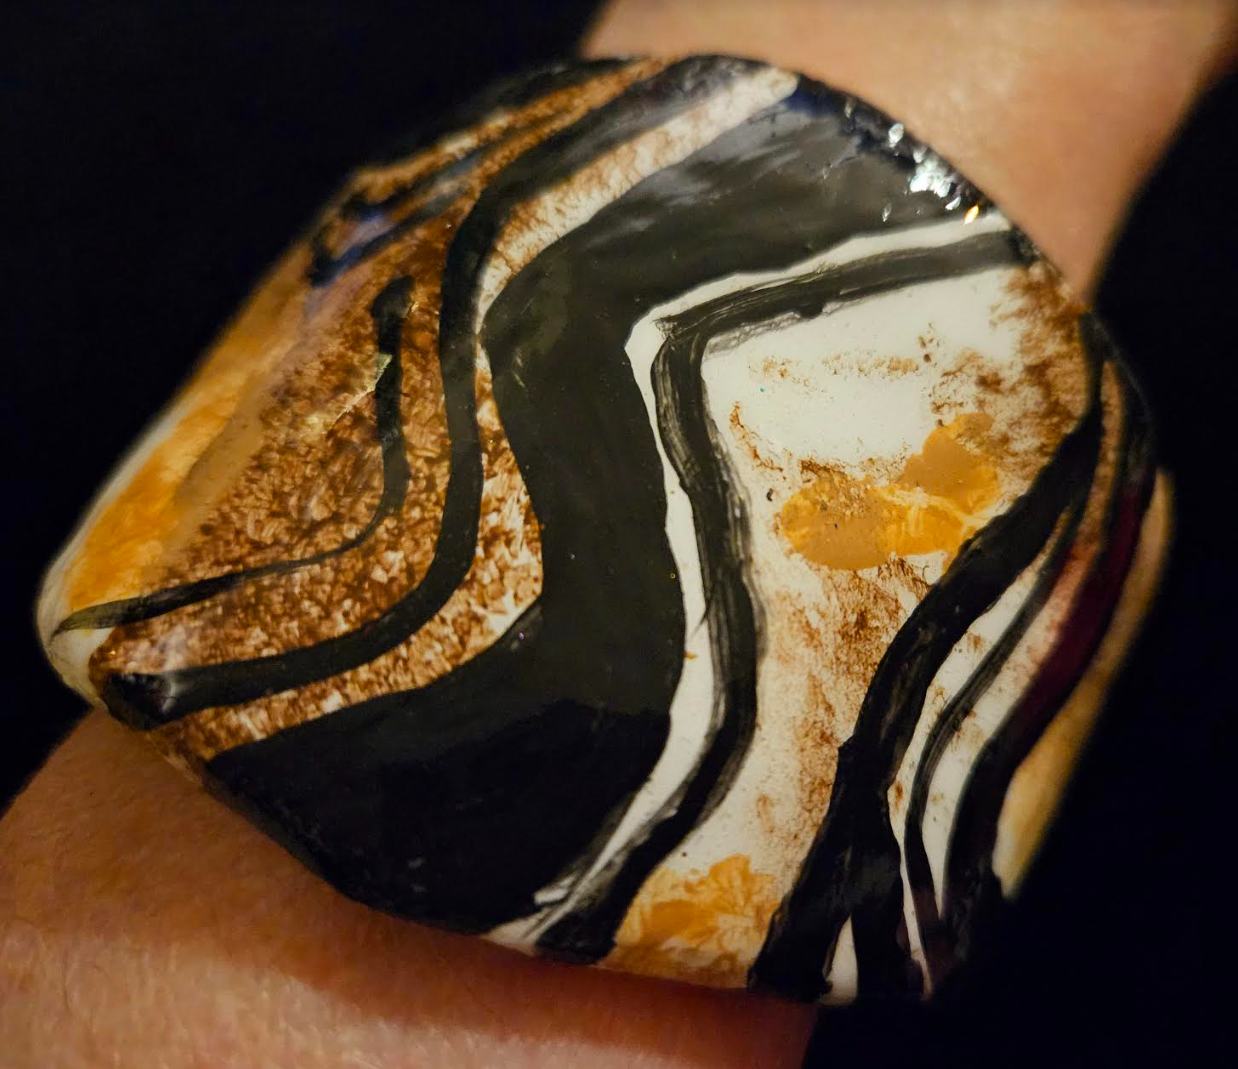 Dramatic African Animal Print Statement Cuff, Hand Sculpted Wild & Exotic Zebra Bangle, Wide Haute Couture Wrist Candy